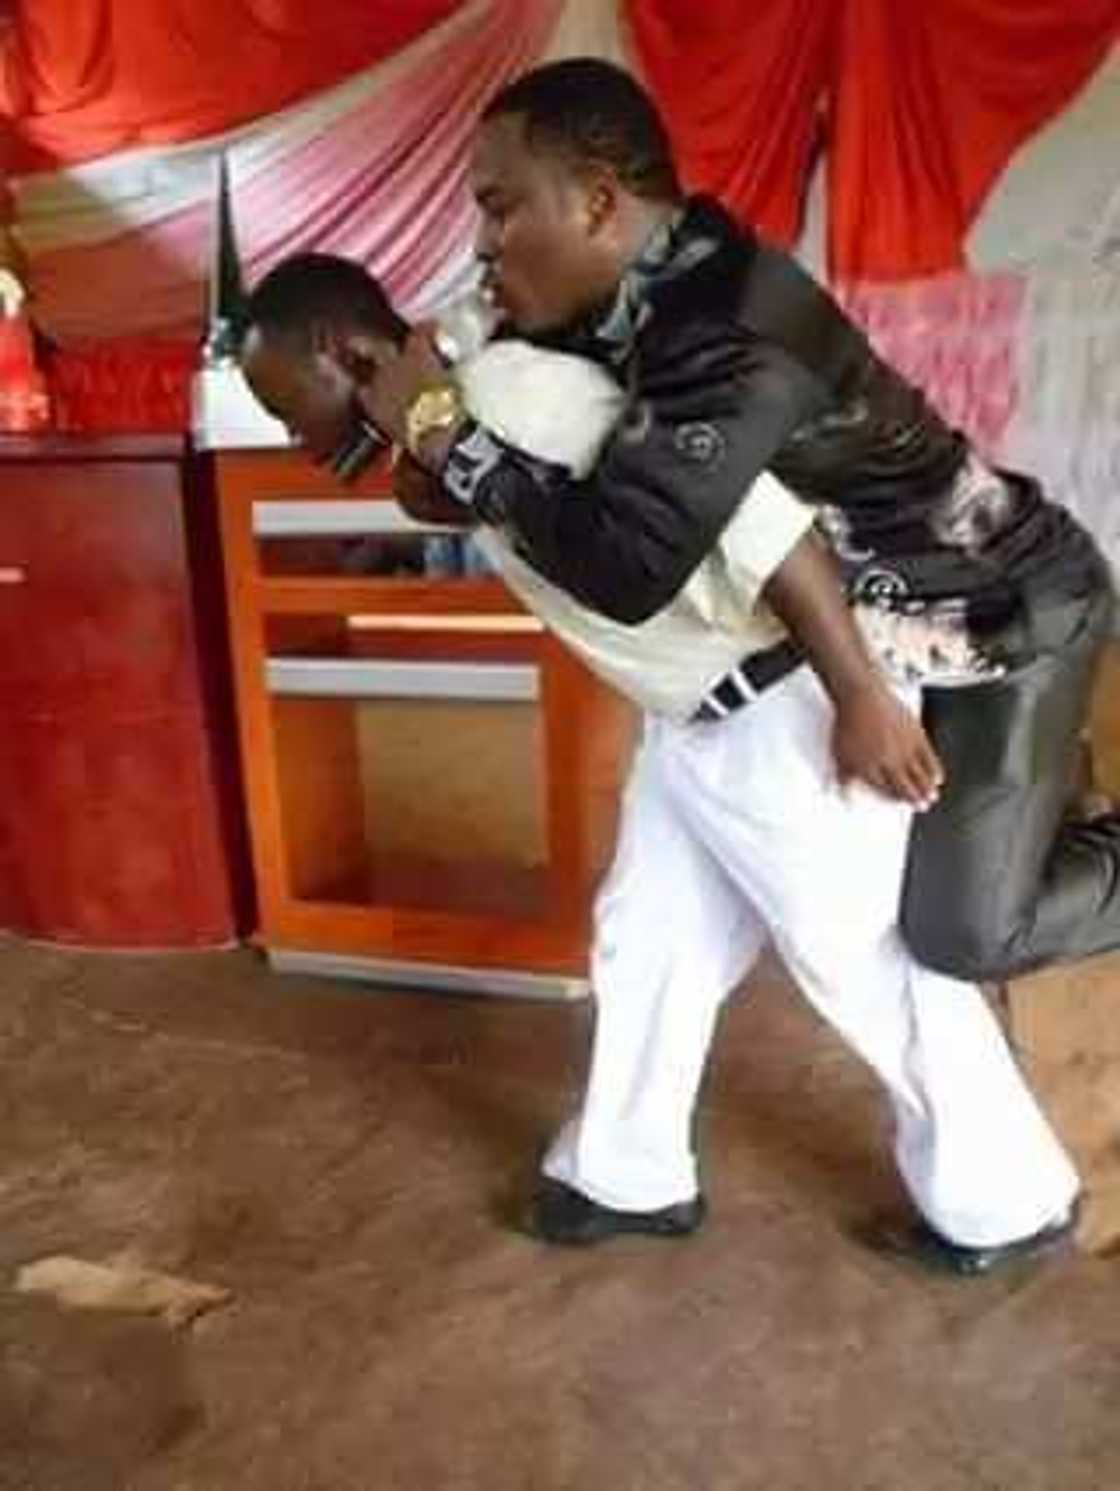 Meet pastor whose legs do not touch ground while ministering